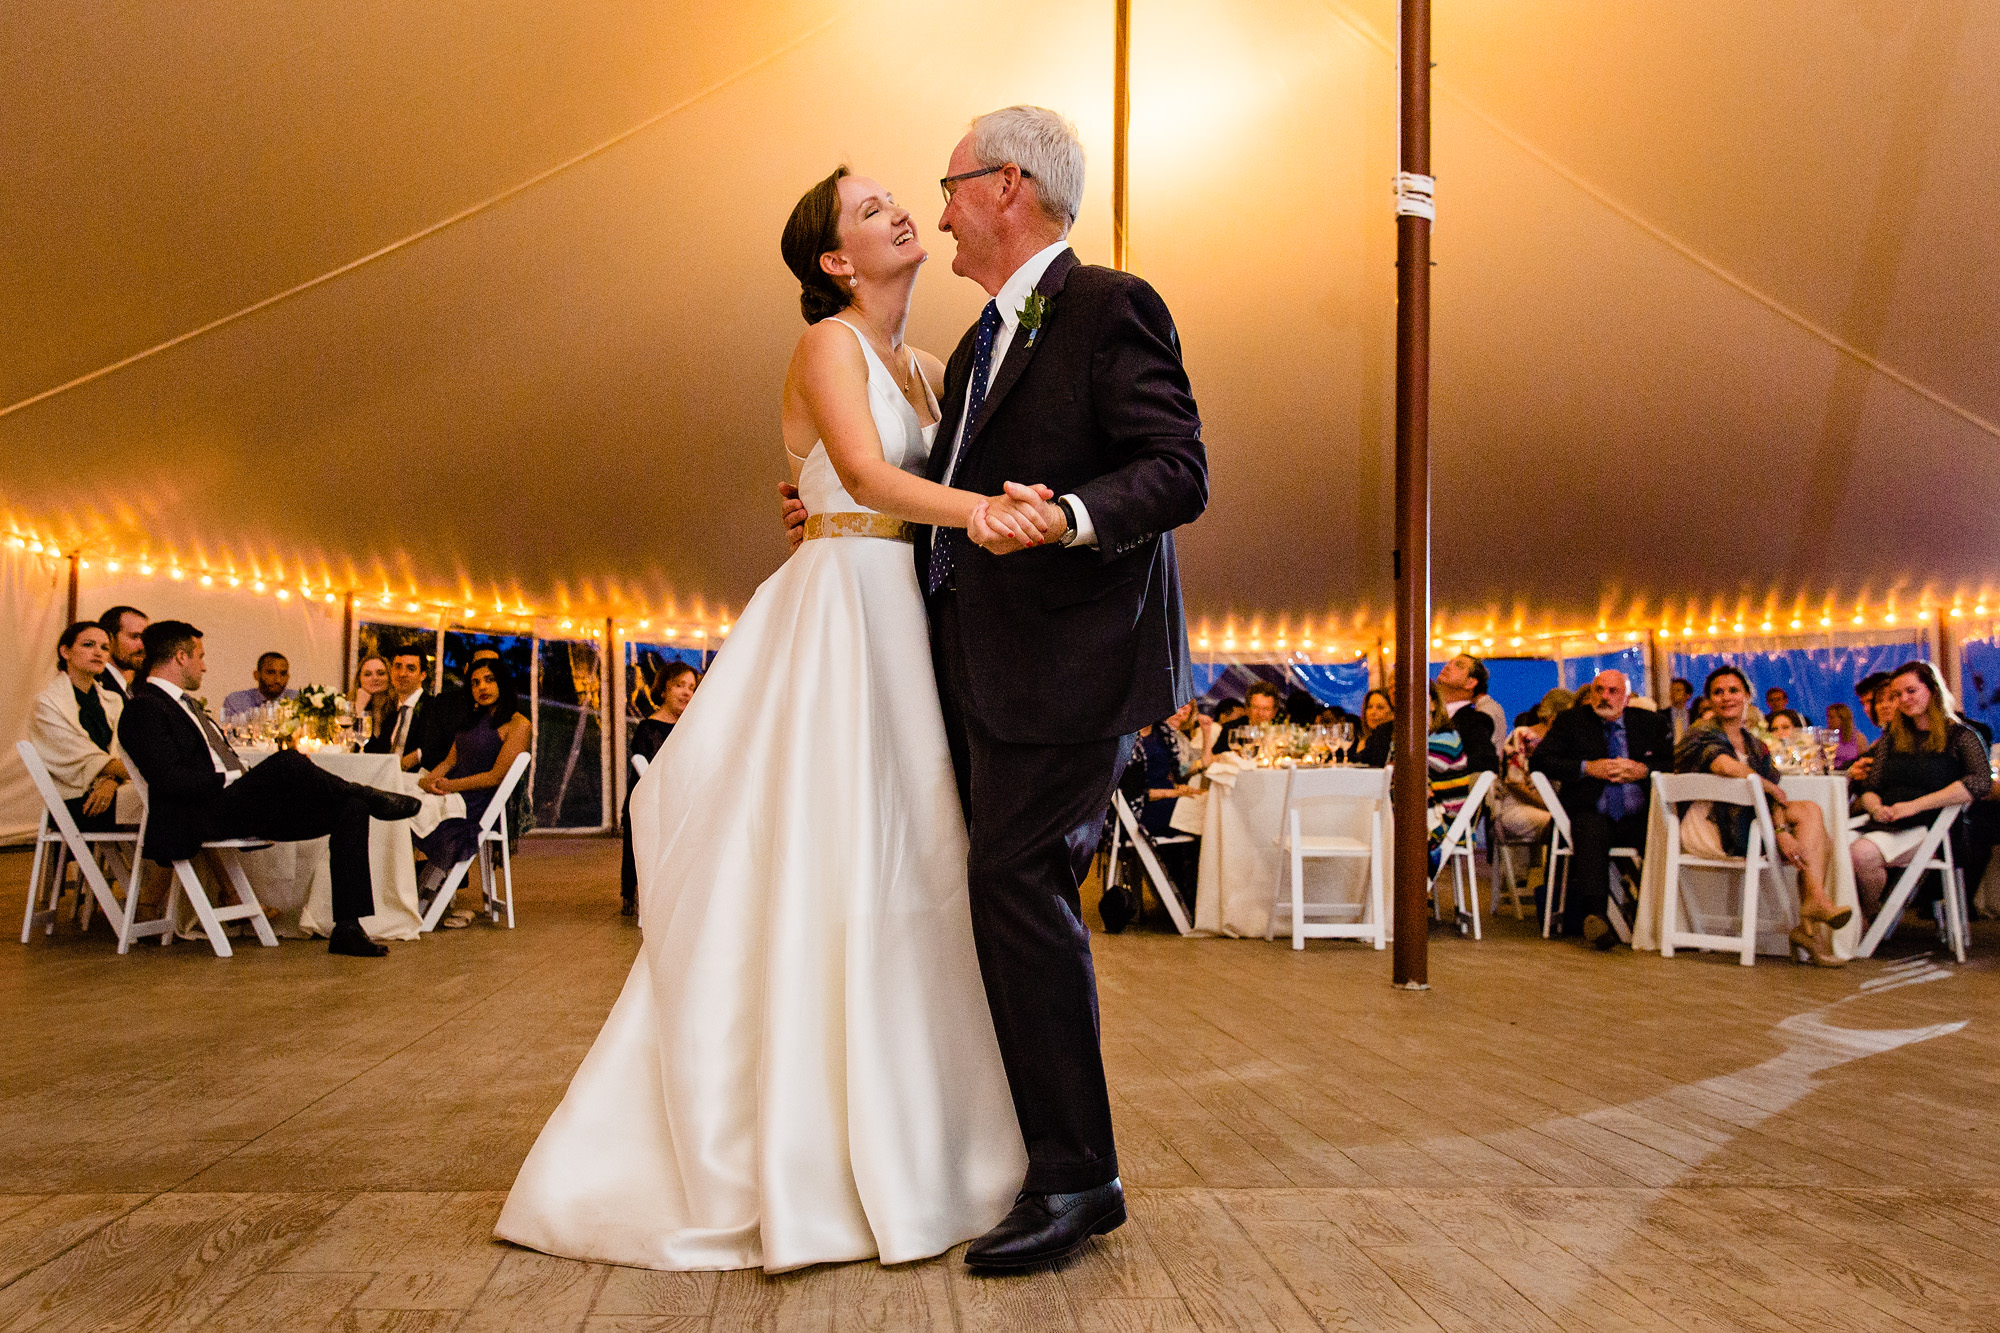 The bride dances with her father at a Stockton Springs, Maine wedding.